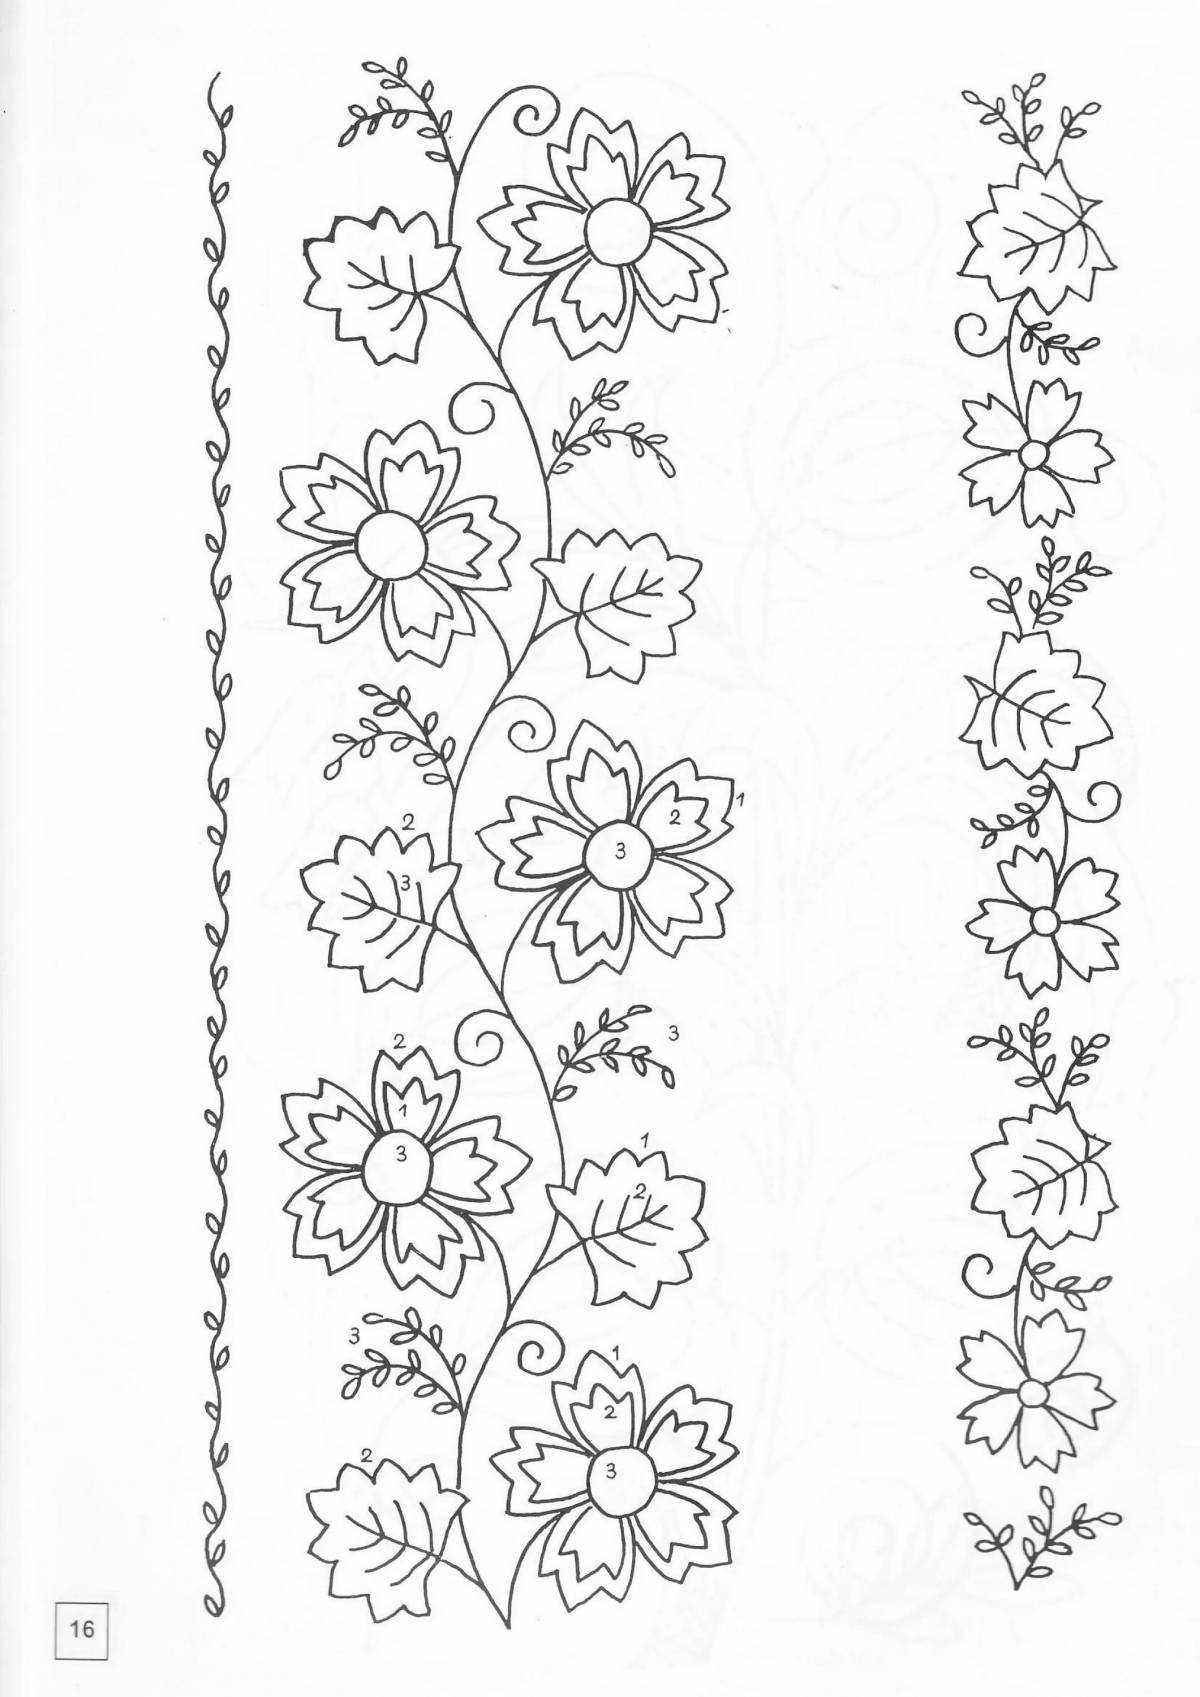 Cute belarusian towel coloring pages for kids